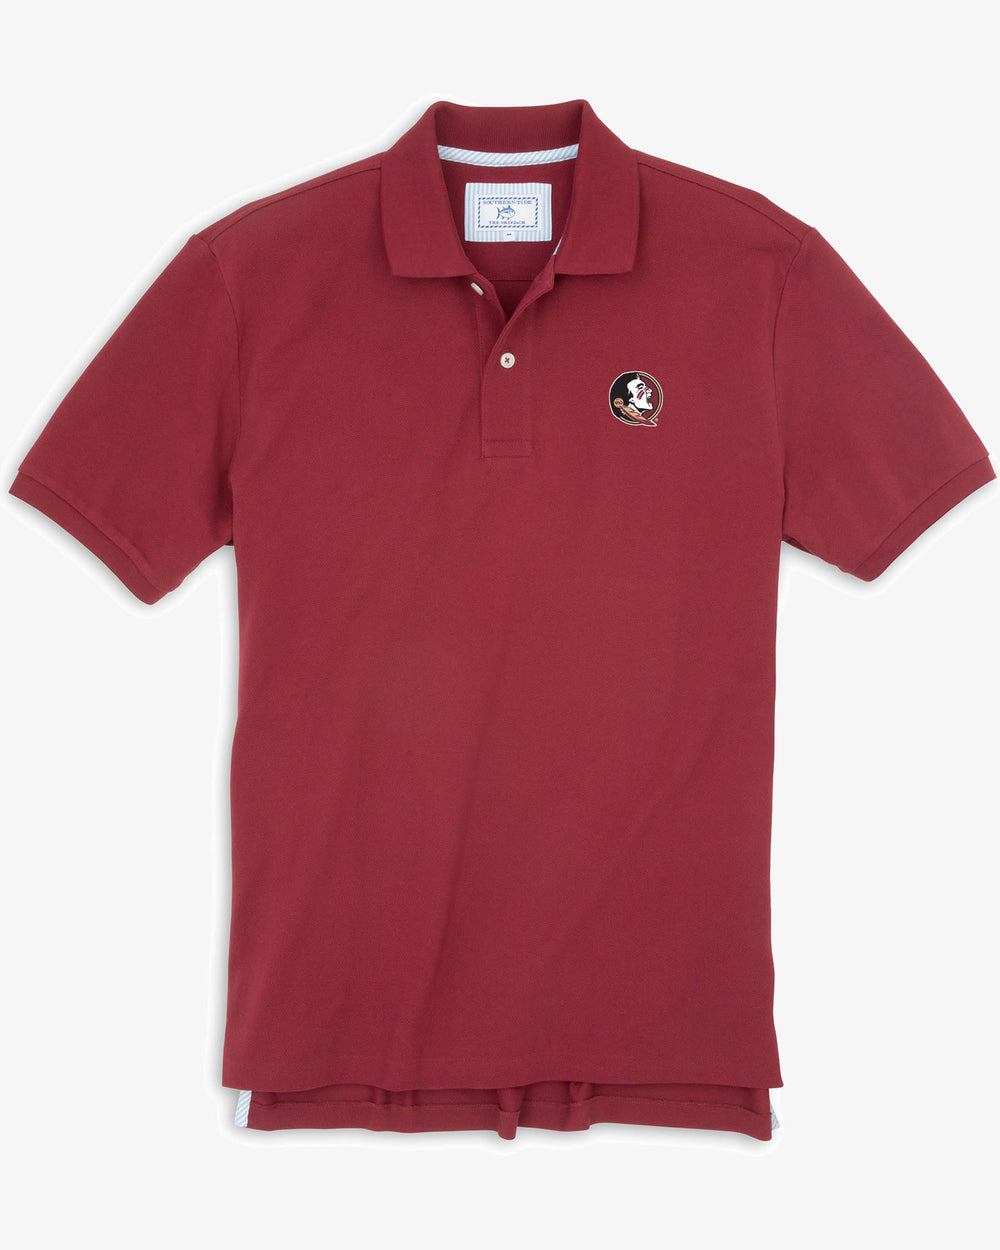 The Front view of the Men's Red FSU Seminoles Pique Polo Shirt by Southern Tide - Chianti